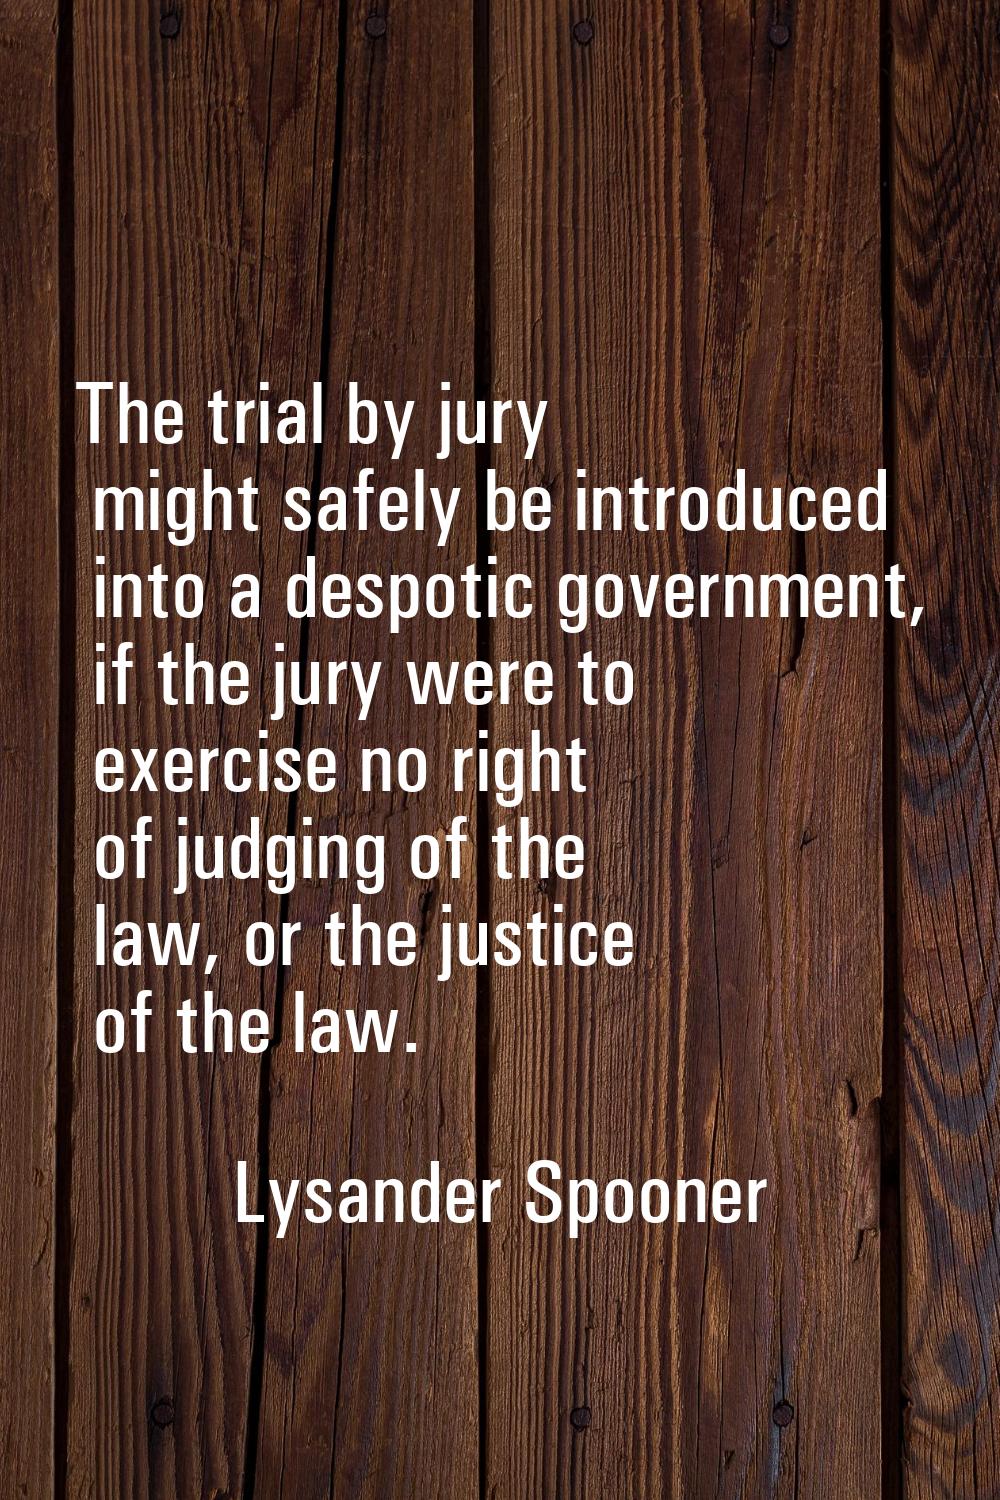 The trial by jury might safely be introduced into a despotic government, if the jury were to exerci